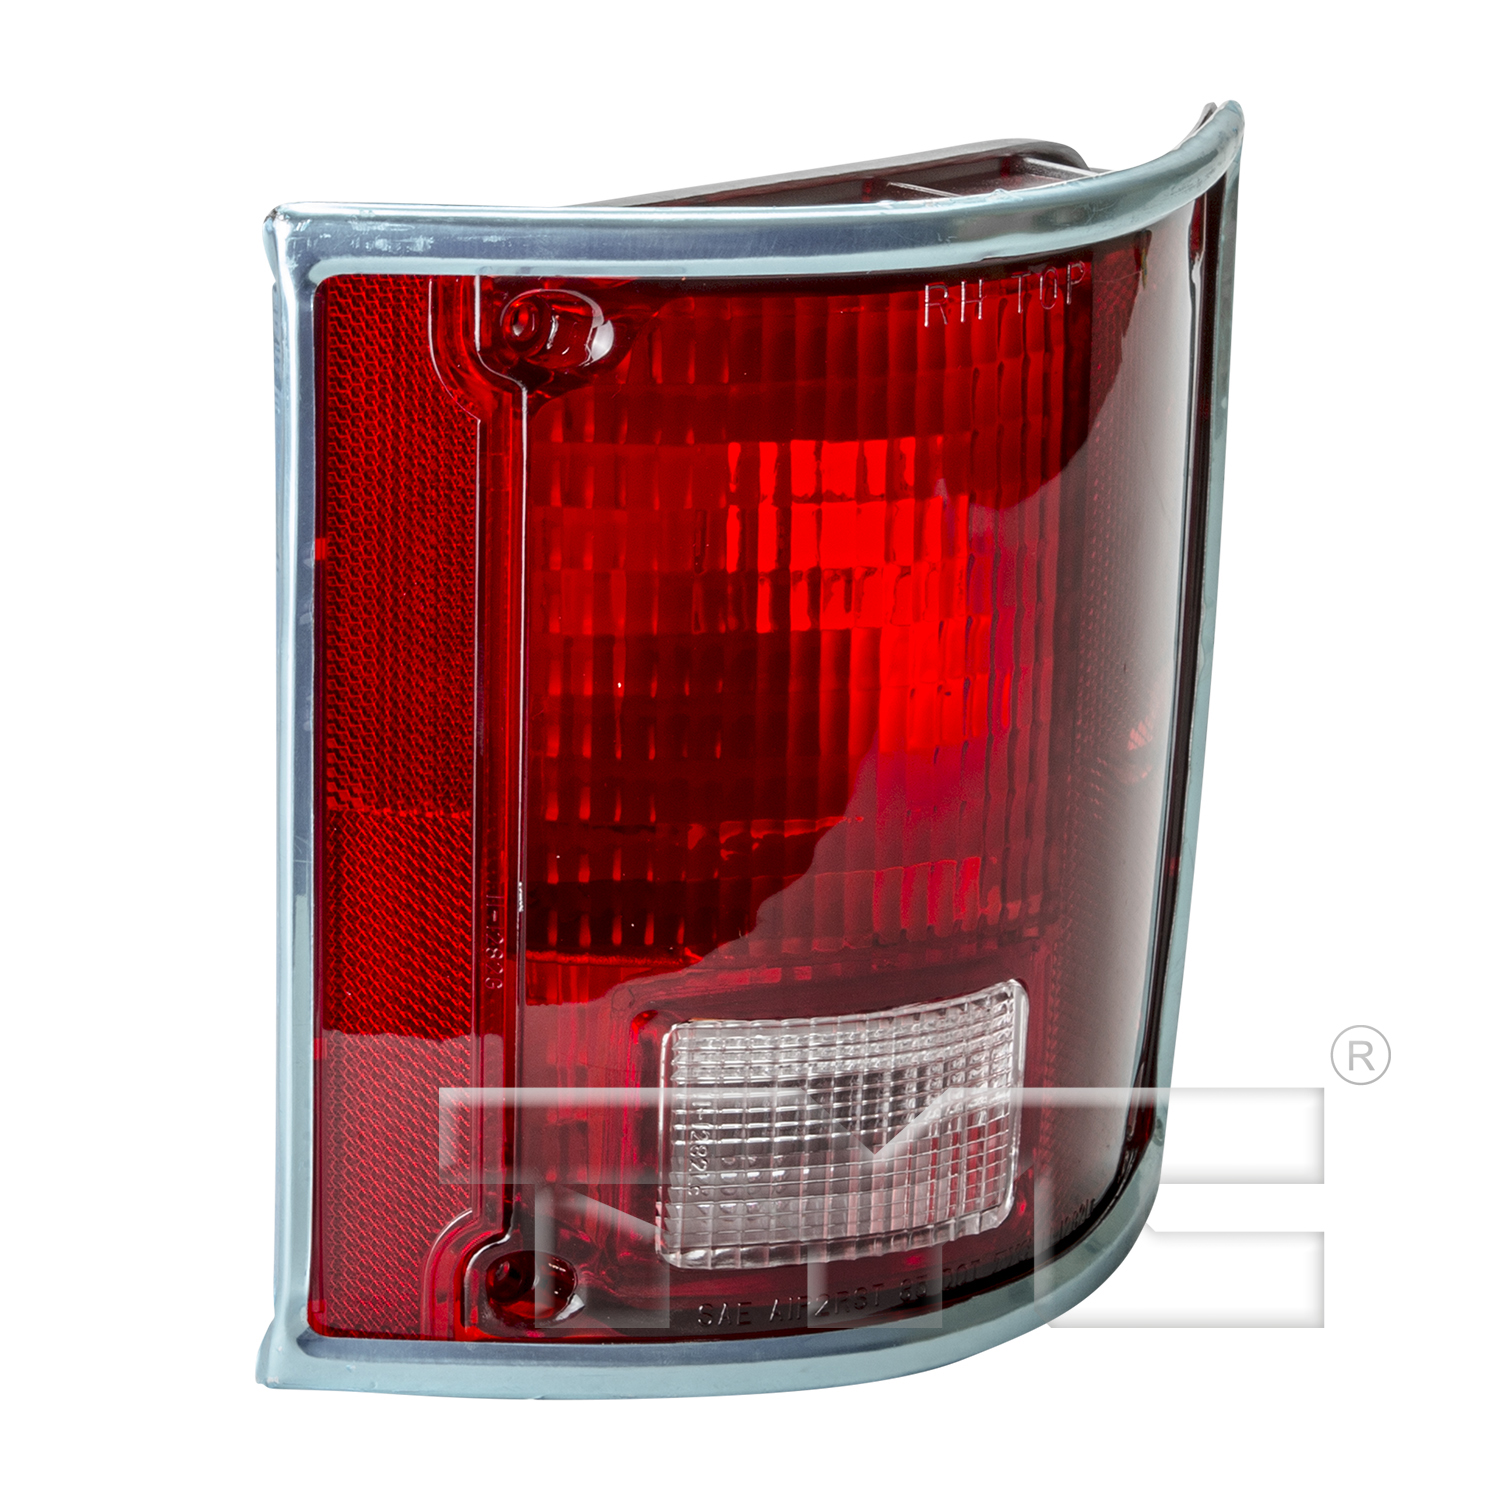 Aftermarket TAILLIGHTS for CHEVROLET - K2500, K2500,88-91,RT Taillamp assy